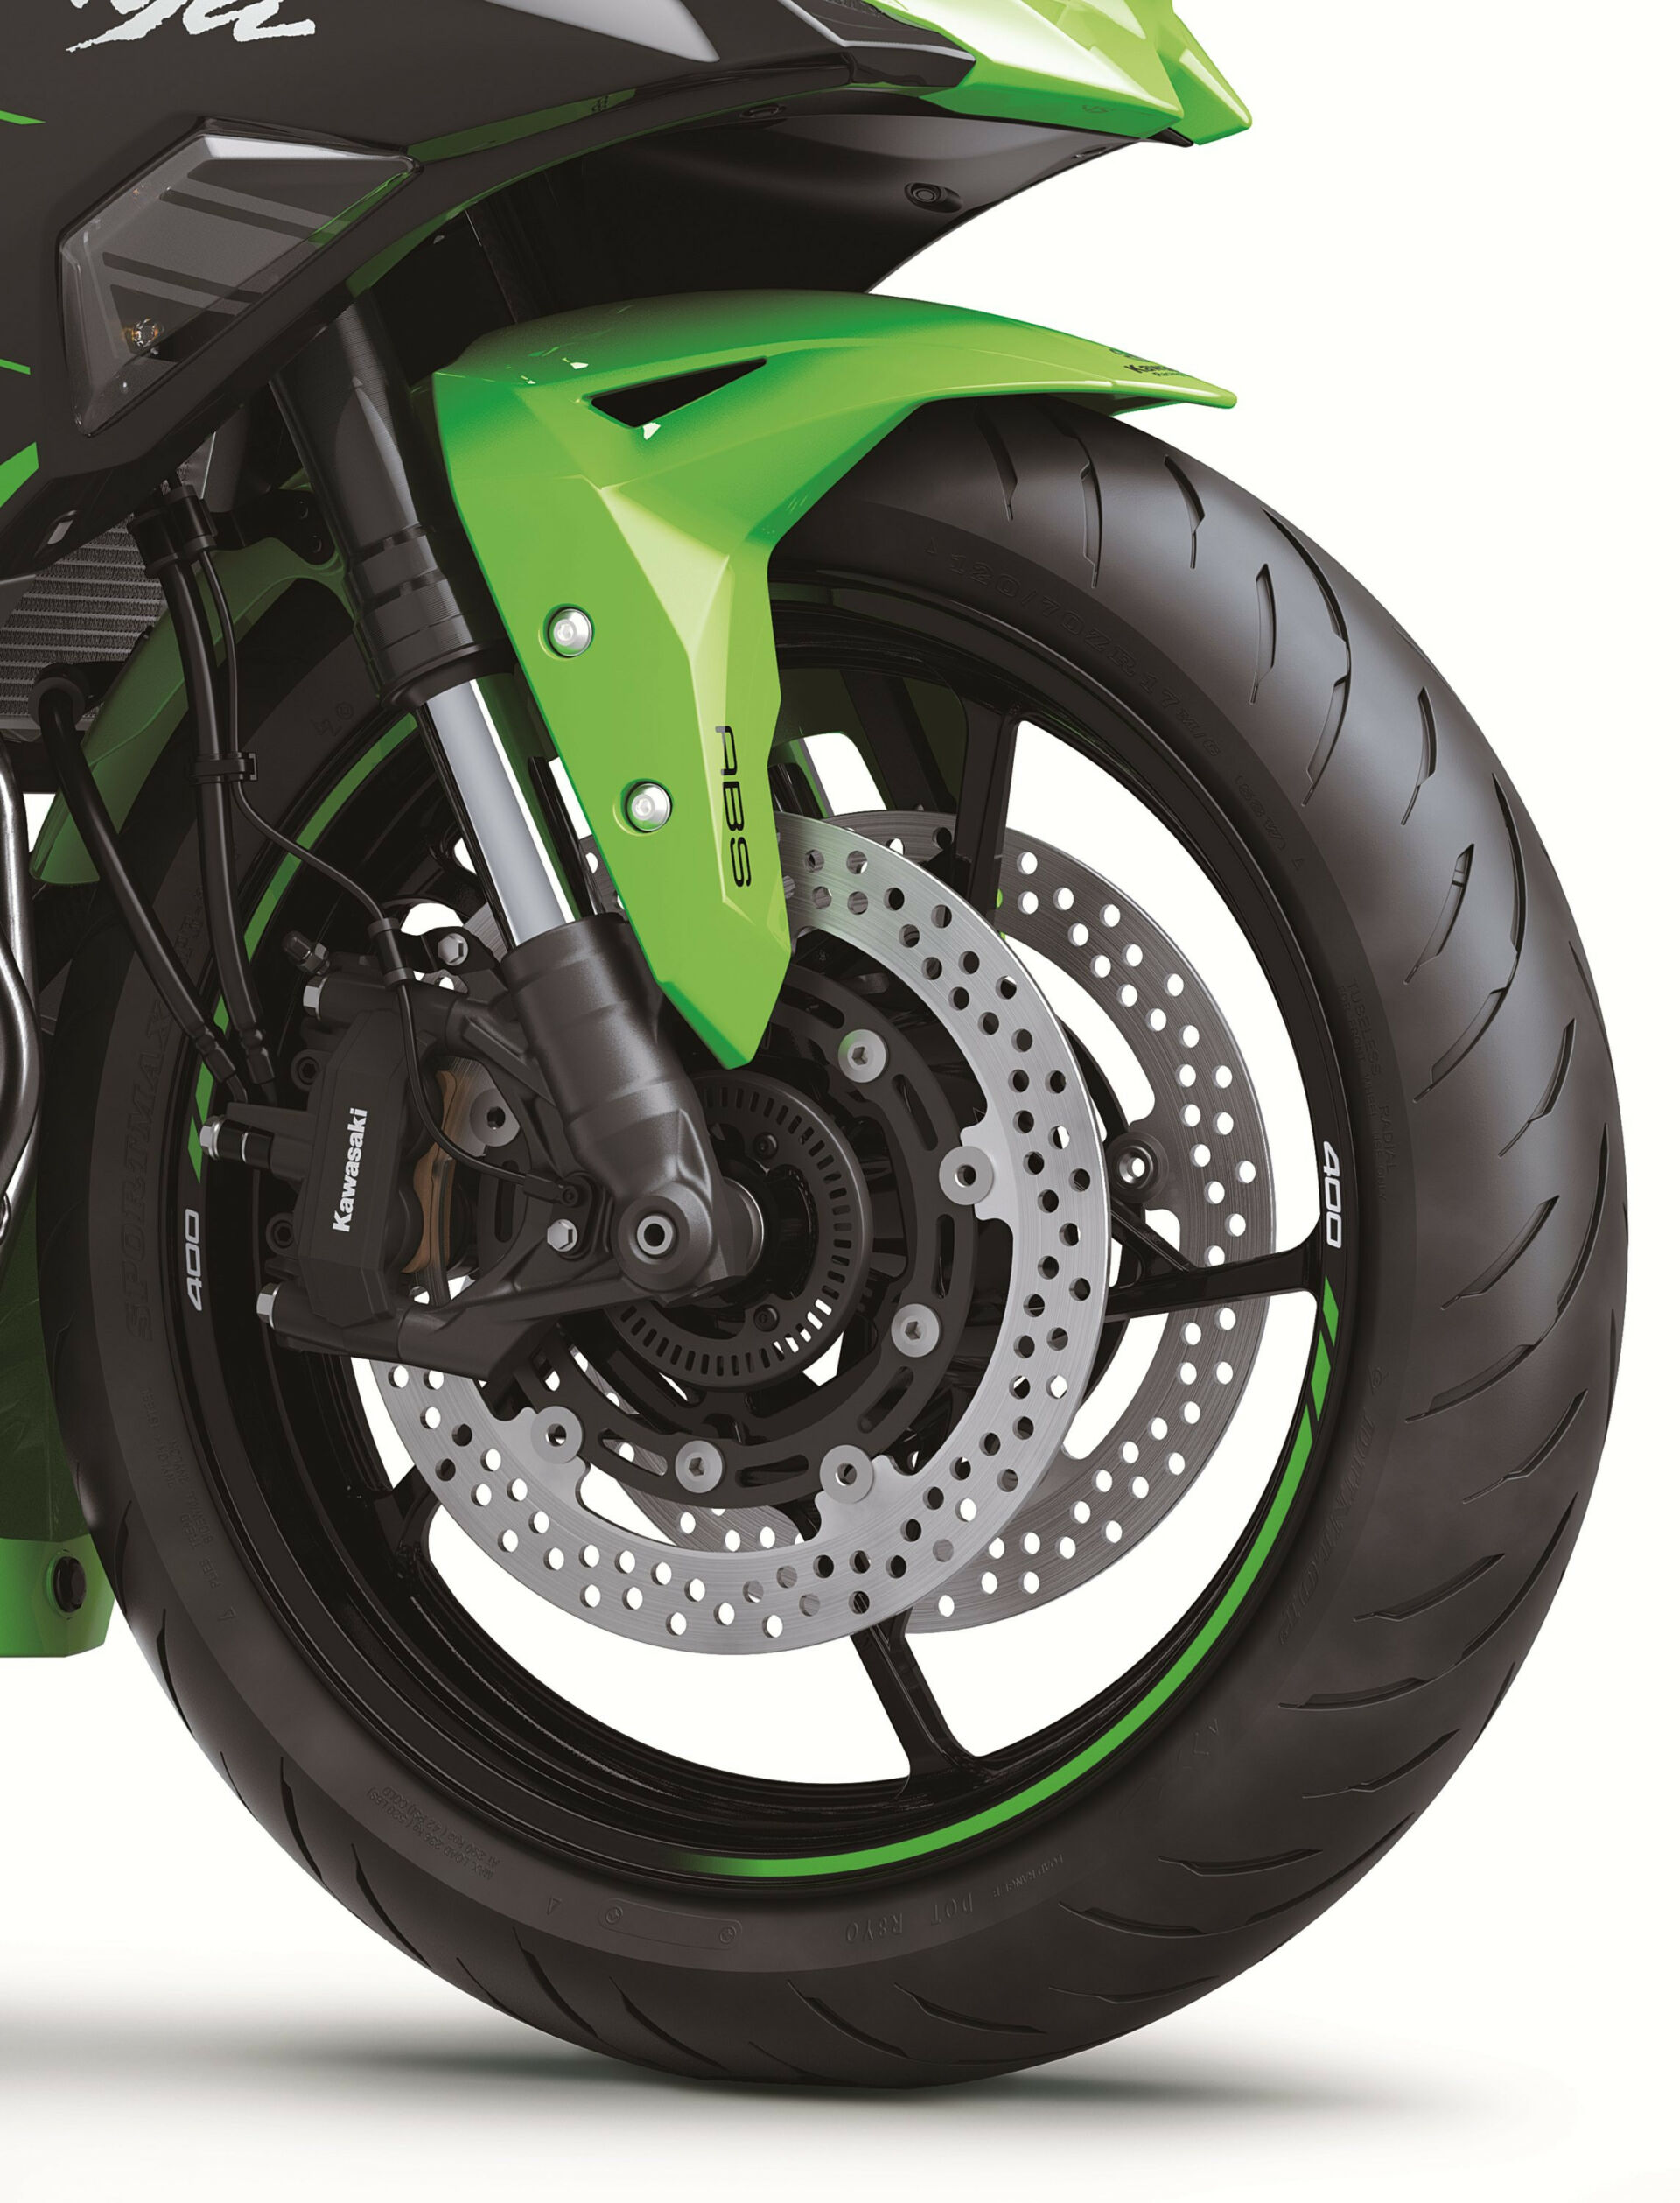 The Kawasaki Ninja ZX-4RR is slowed by dual 290mm front discs and radial-mount four-piston monoblock front brake calipers. Photo courtesy Kawasaki.